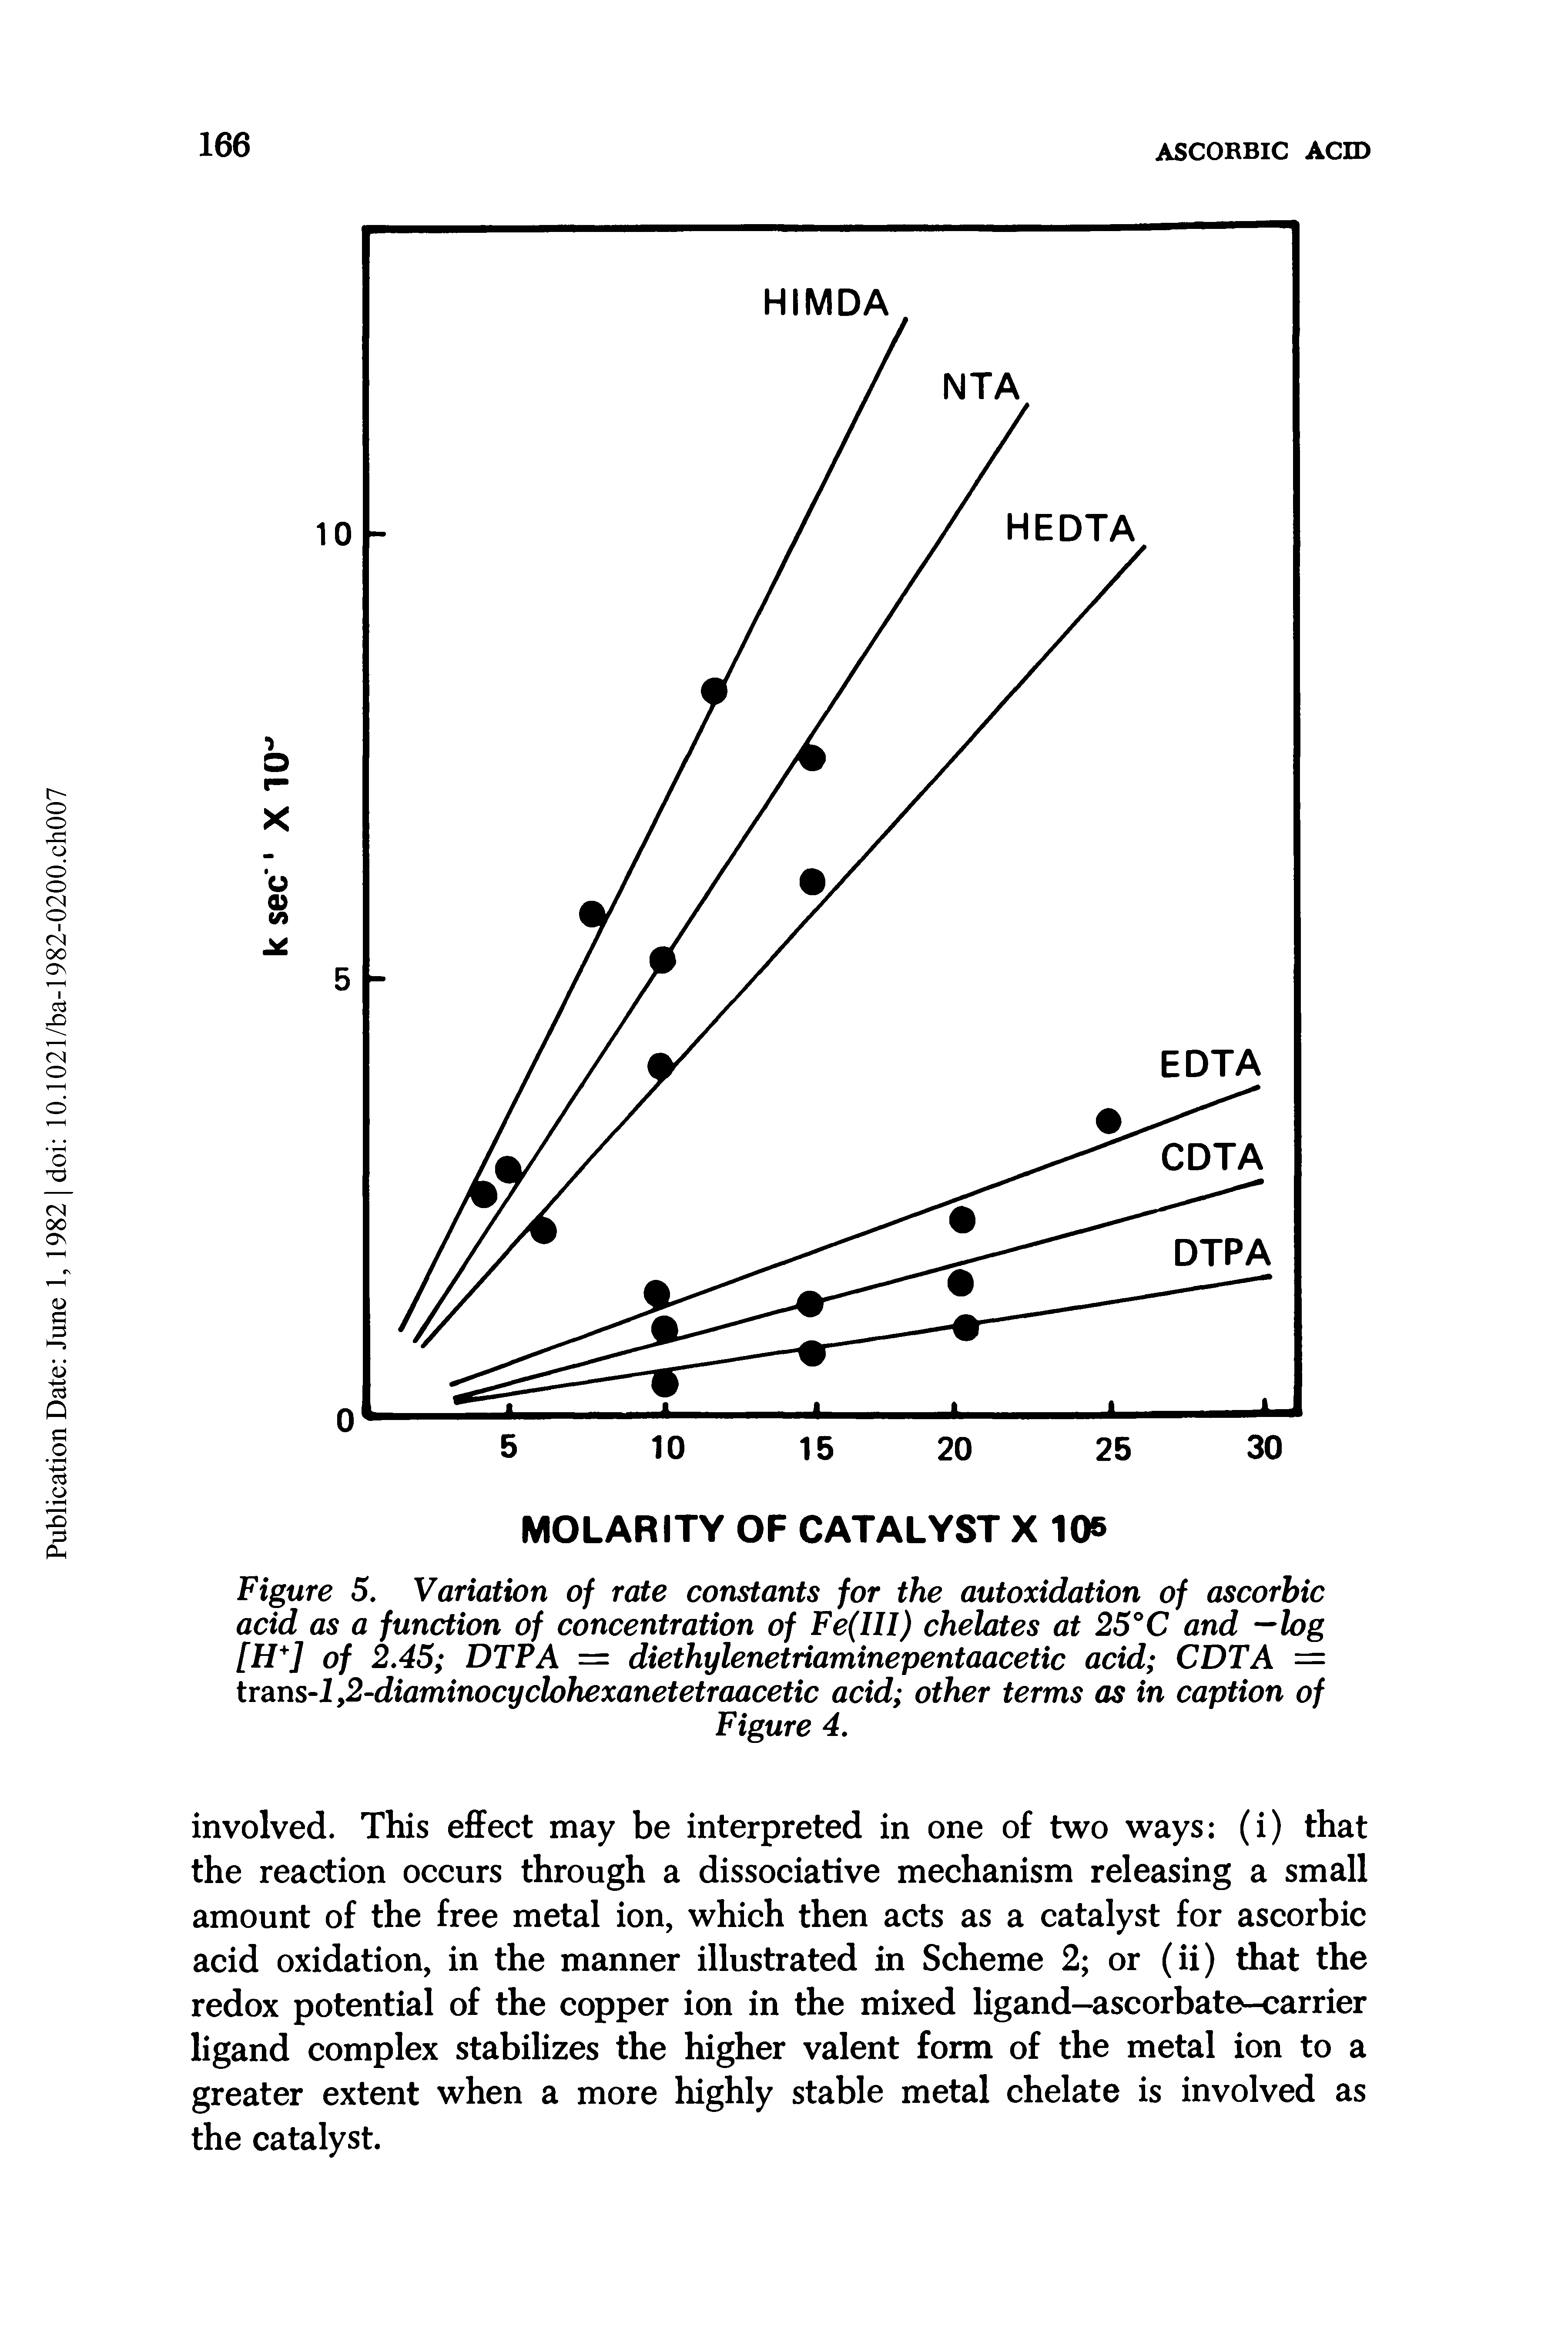 Figure 5. Variation of rate constants for the autoxidation of ascorbic acid as a function of concentration of Fe(III) chelates at 25°C and —log [H ] of 2.45 DTPA = diethylenetriaminepentaacetic acid CDTA = trsins l,2-diaminocyclohexanetetraacetic acid other terms as in caption of...